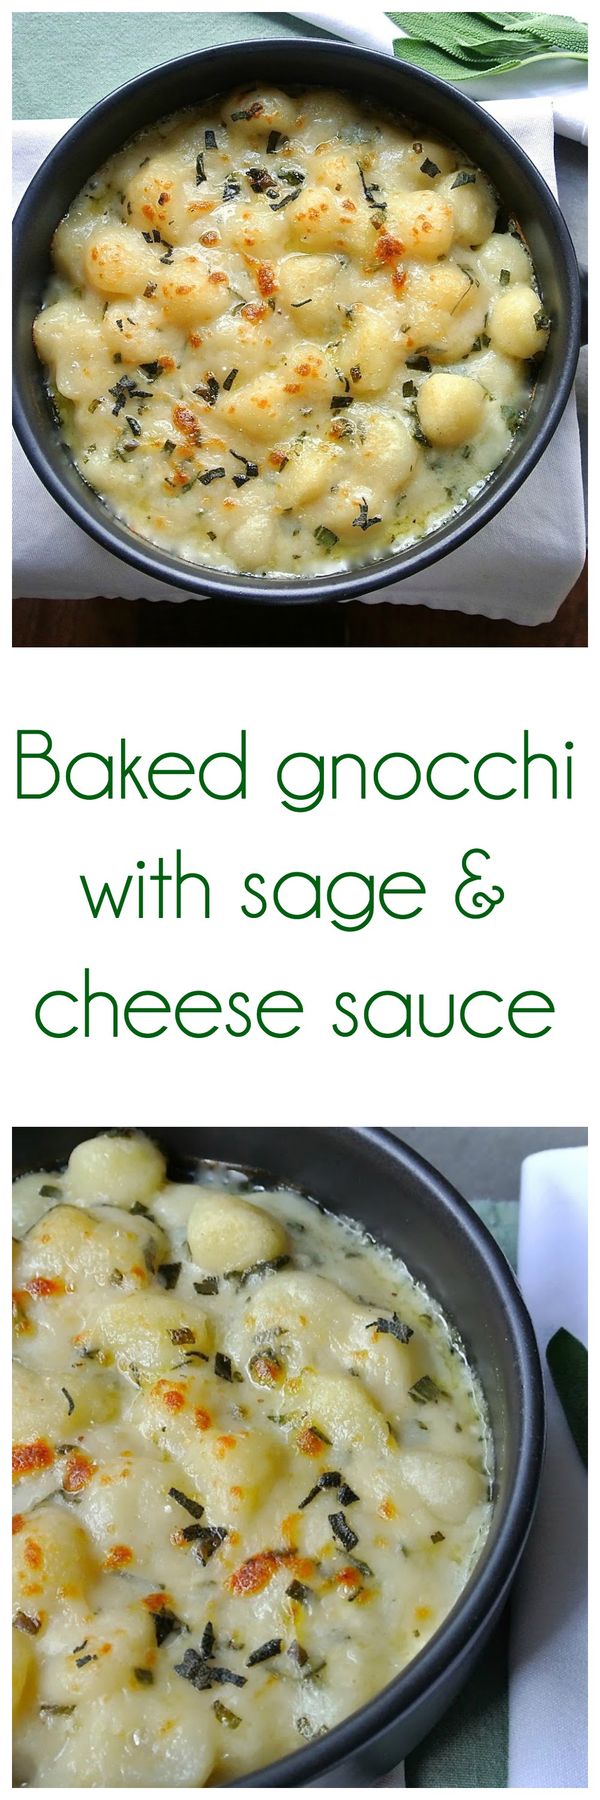 Baked gnocchi with sage and cheese sauce